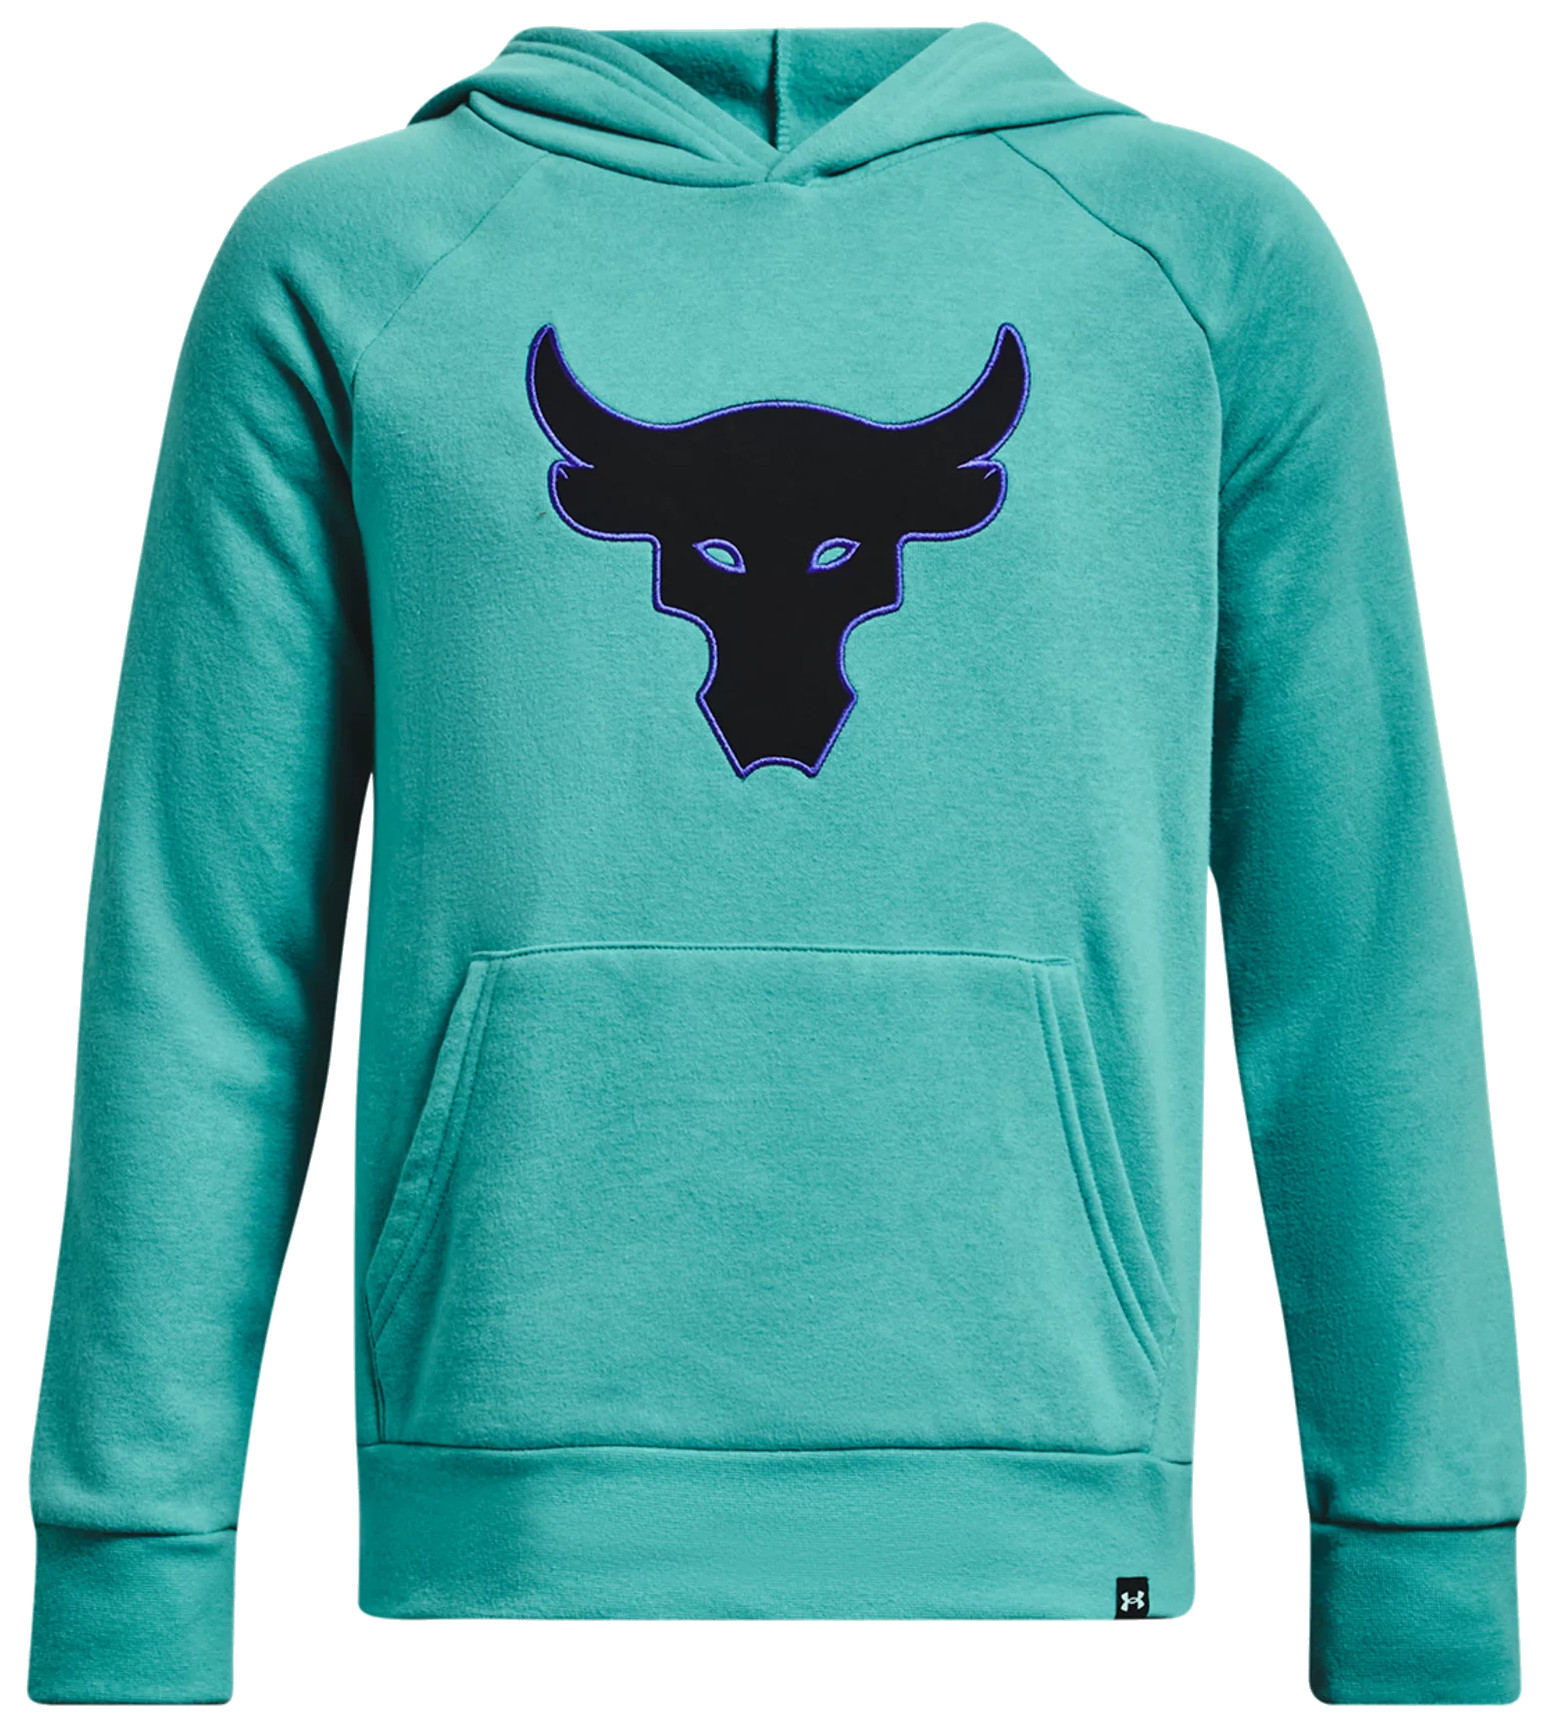 https://i1.t4s.cz/products/1374930-370/under-armour-under-armour-project-rock-rival-fleece-applique-666851-1374930-370.jpg